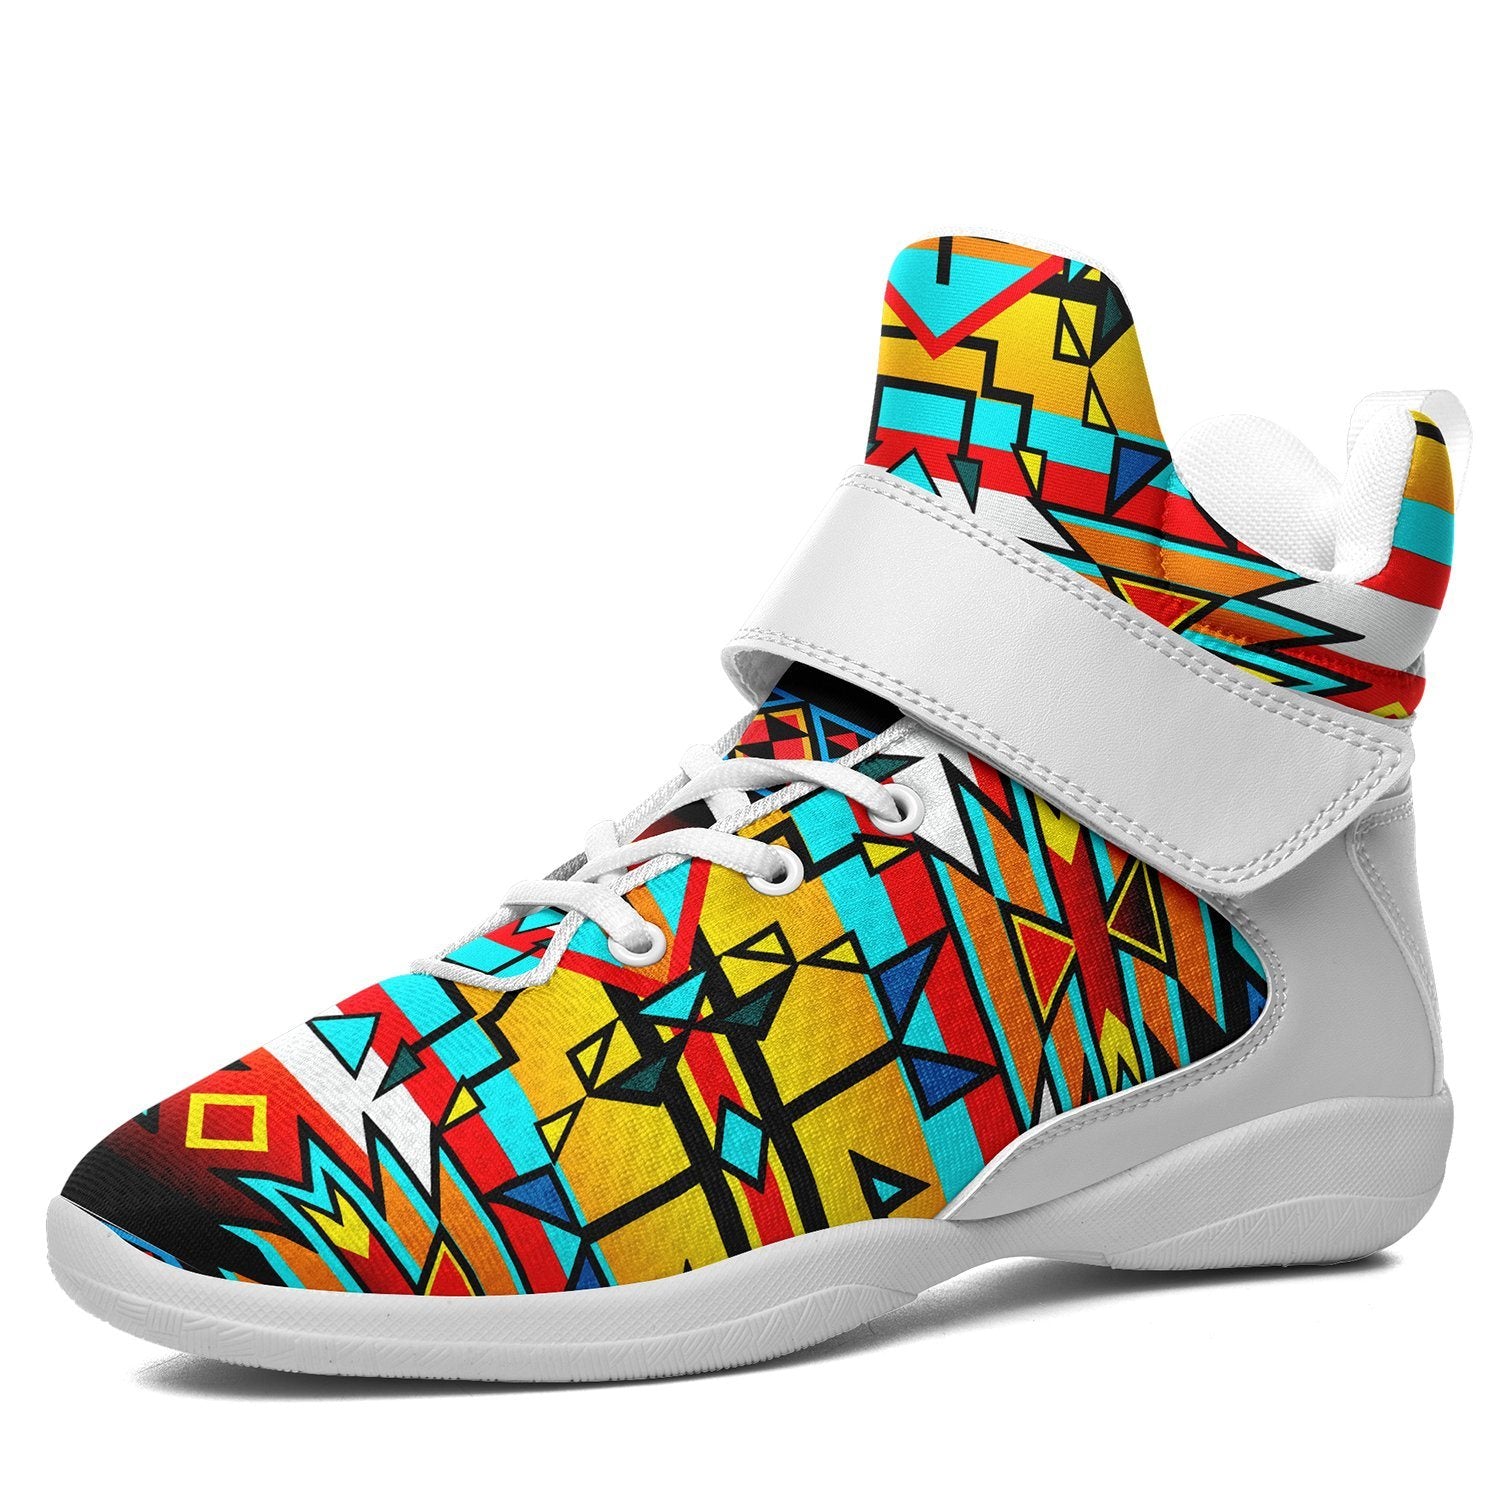 Force of Nature Twister Ipottaa Basketball / Sport High Top Shoes 49 Dzine US Women 4.5 / US Youth 3.5 / EUR 35 White Sole with White Strap 